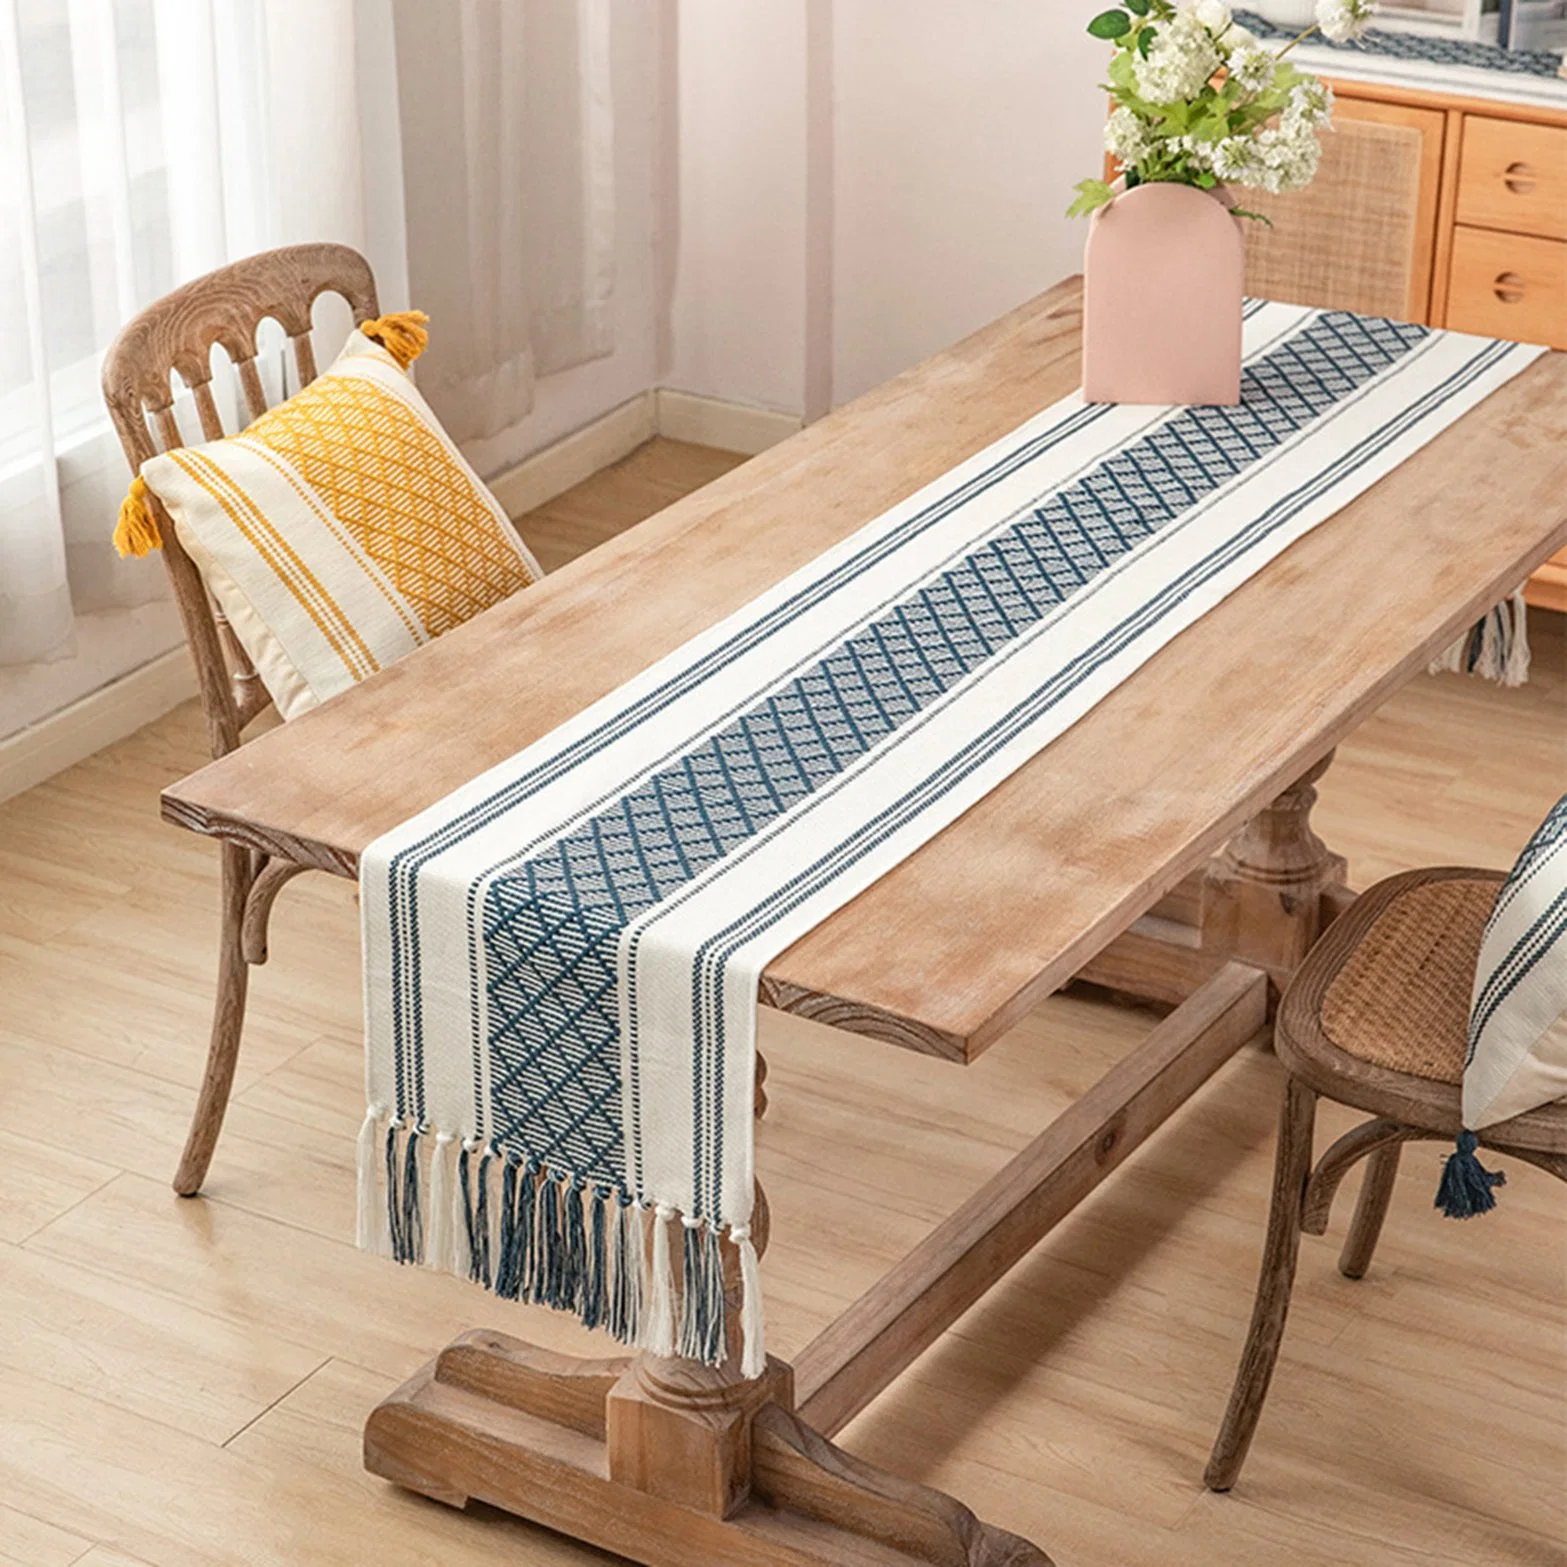 Boho Stripe Woven Table Cover, Table Runner with Tassels, Table Cloth for Dining Table